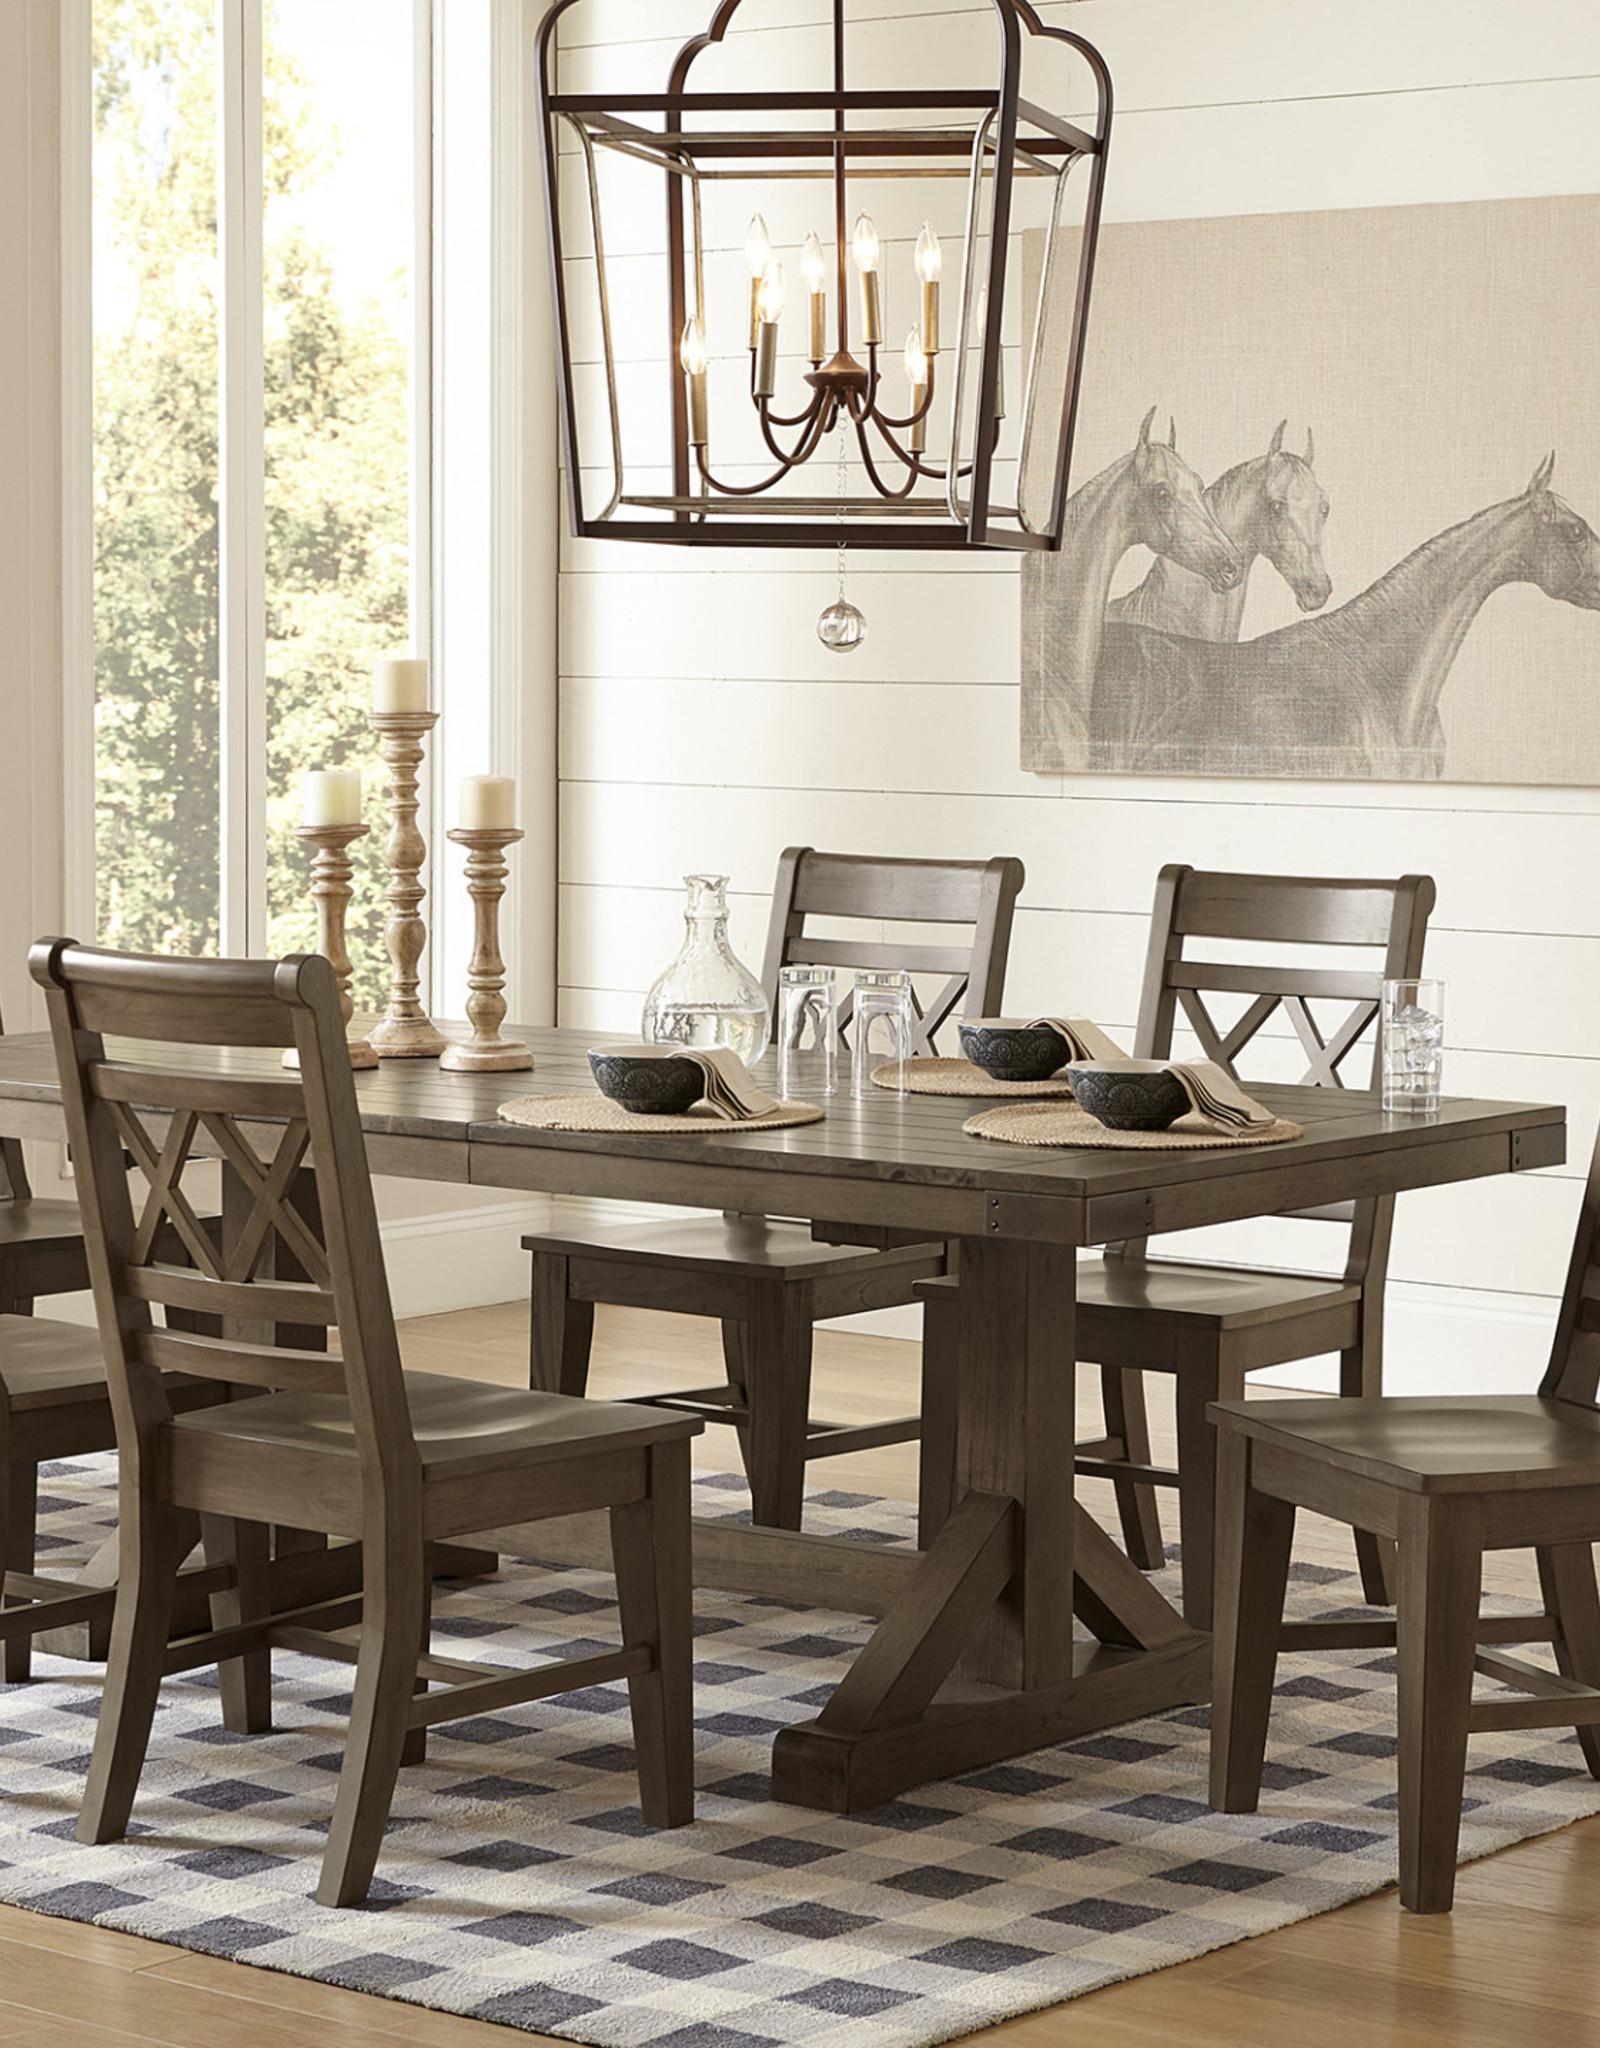 Whitewood Farmhouse Chic Extension Table - Specify Brindle or Bourbon